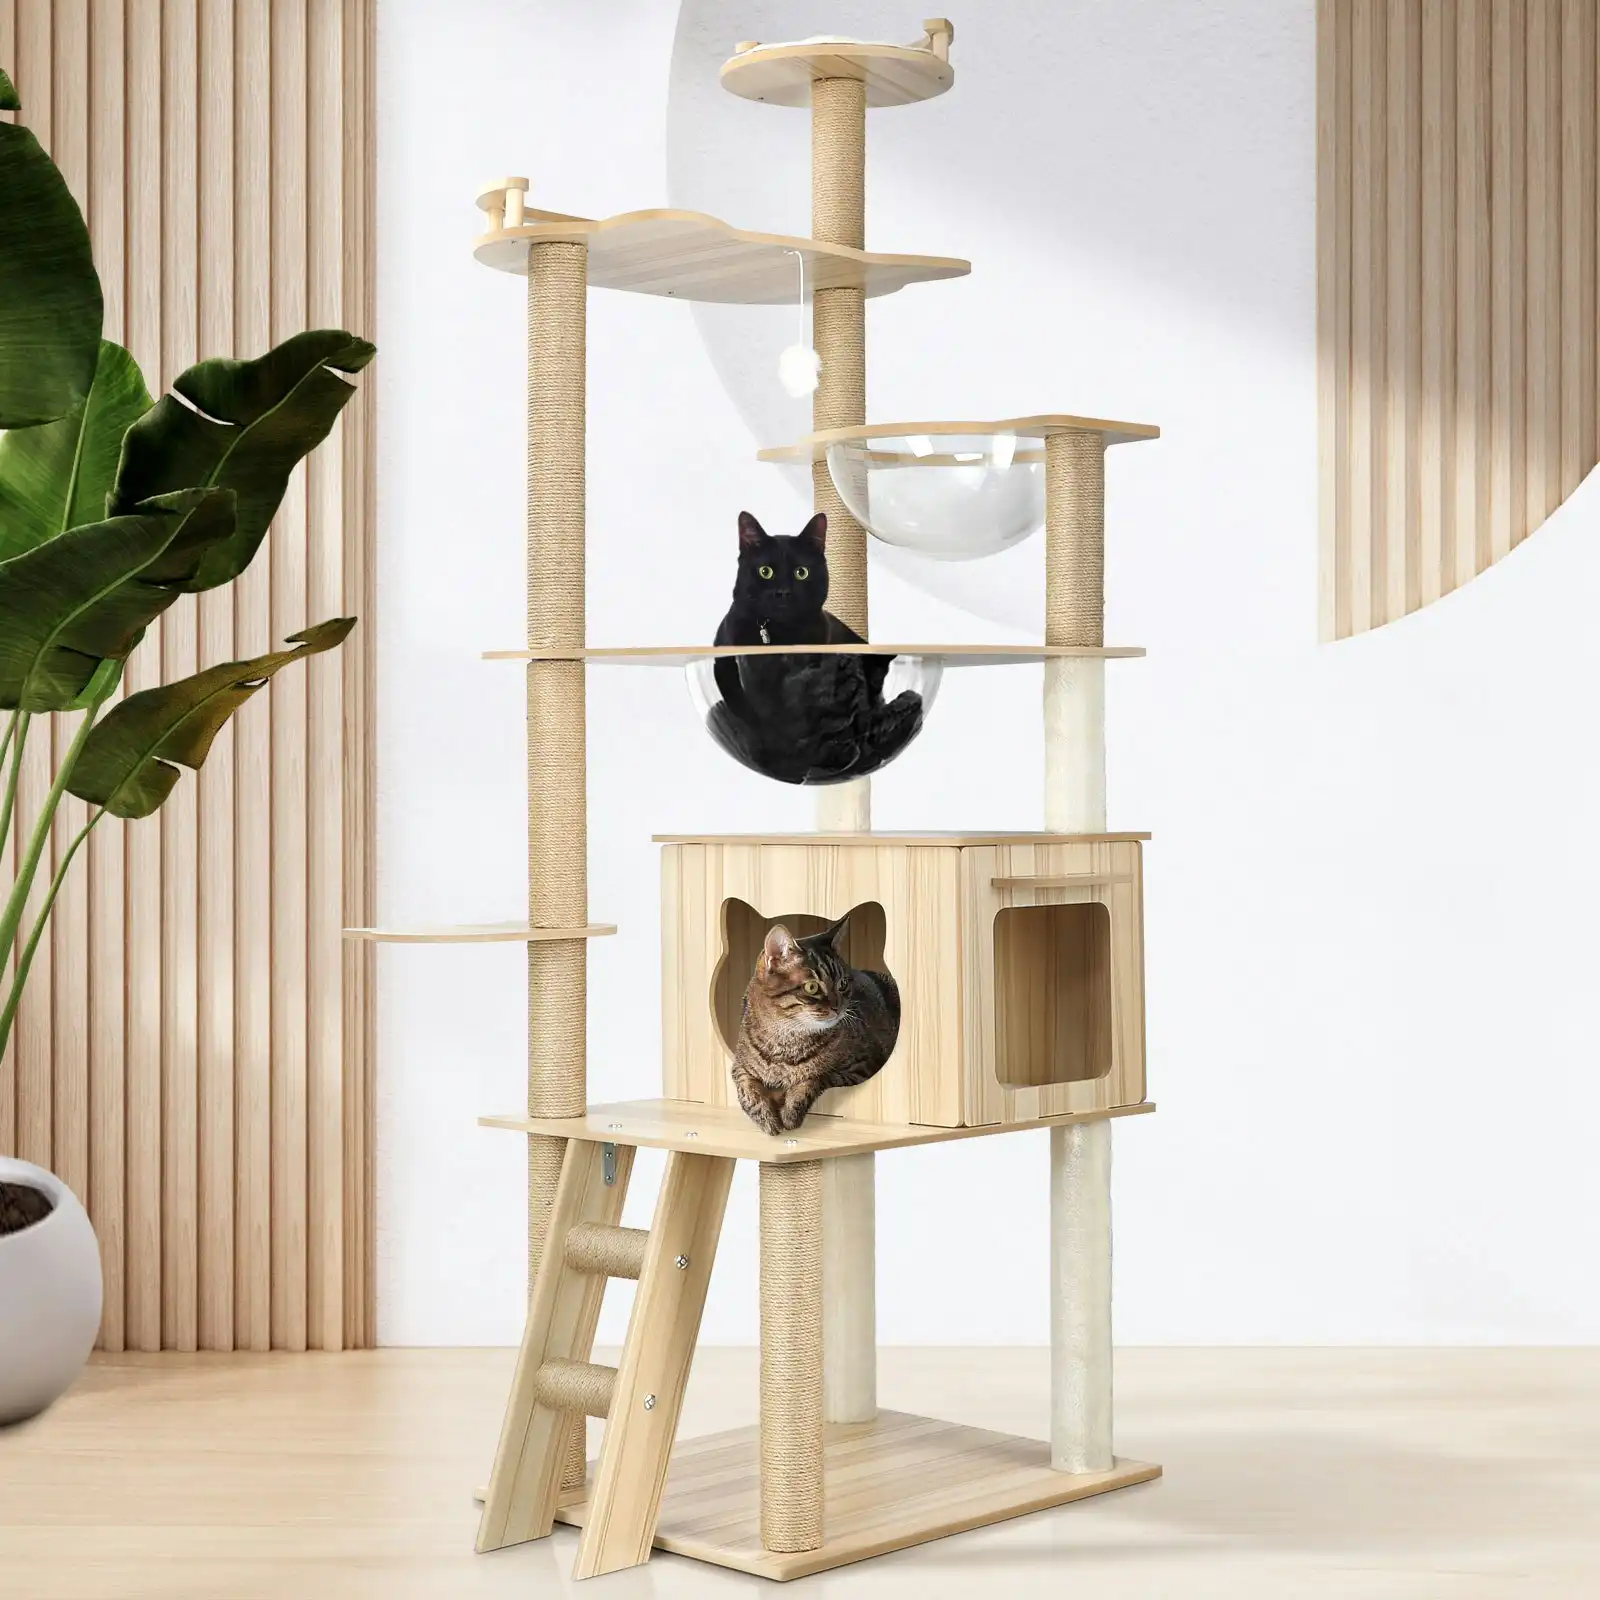 Alopet Cat Tree Scratching Post Scratcher Tower Wood Condo House Bed Large 174CM